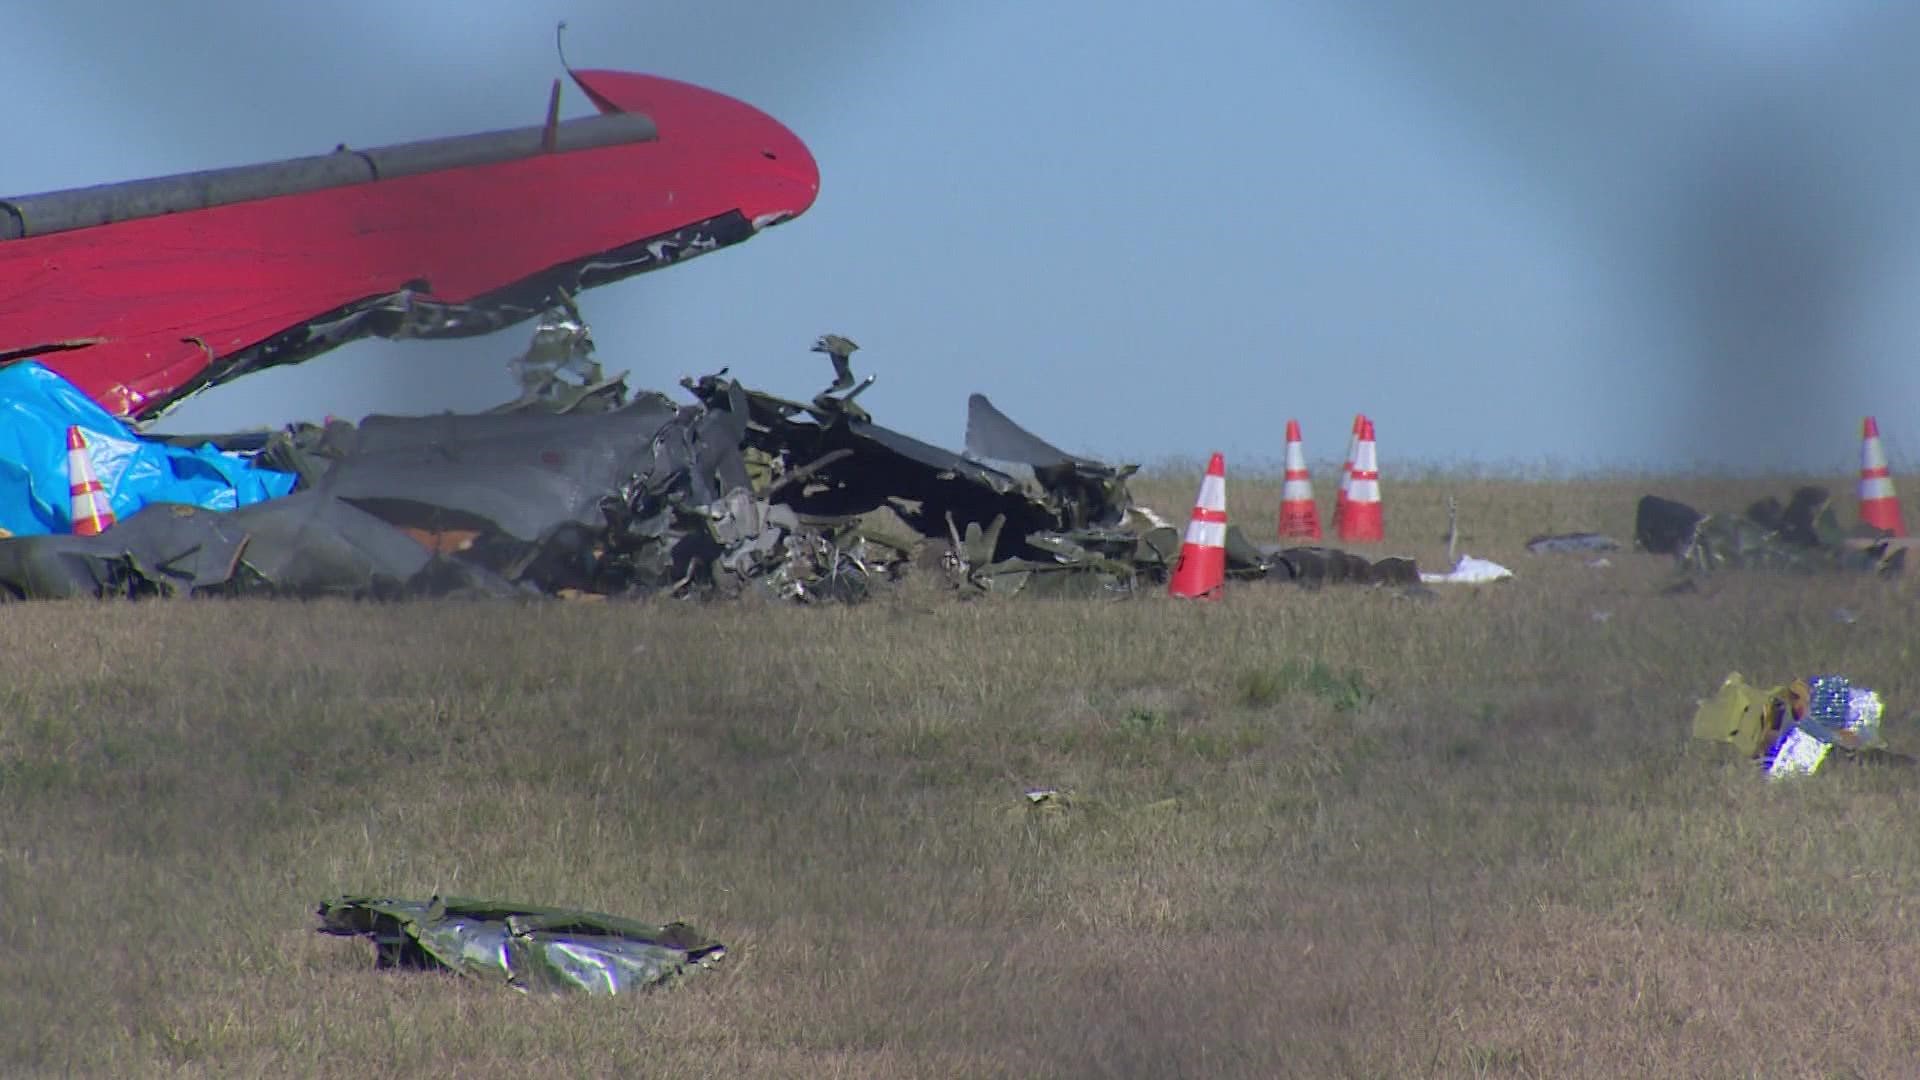 The NTSB is taking over the the investigation into the mid-air collision between two historic military planes.